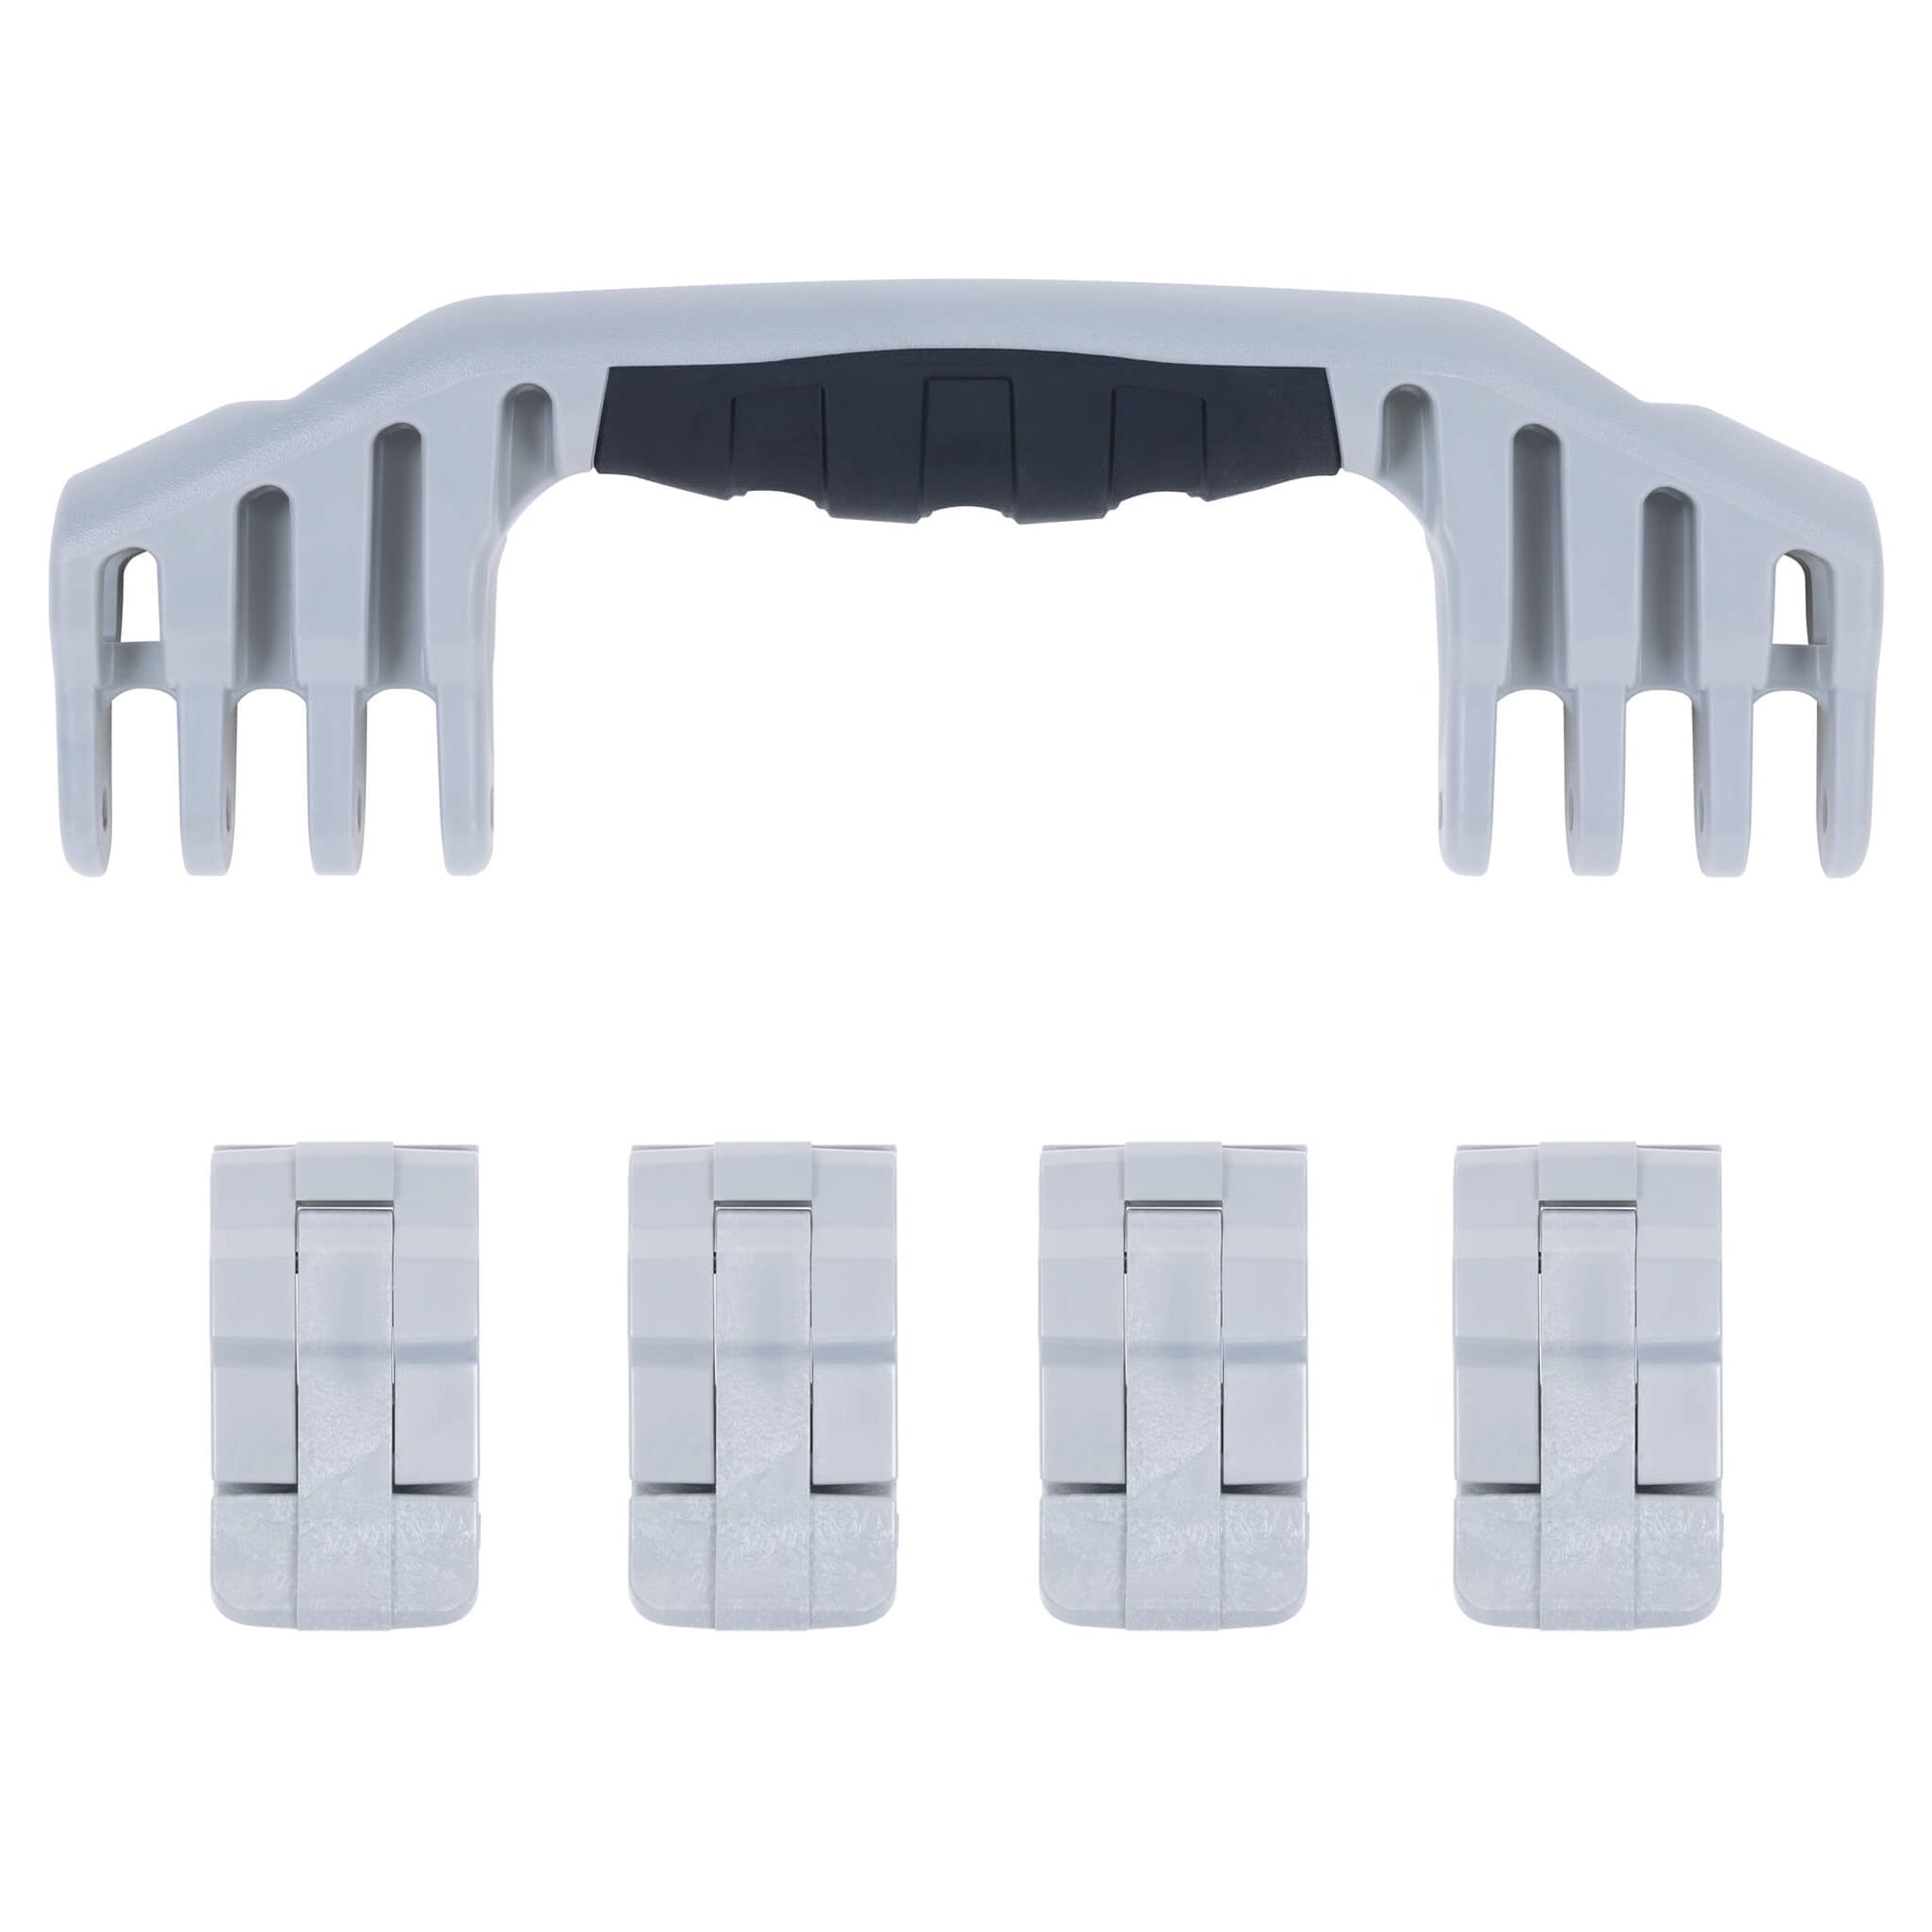 Pelican 1600 Replacement Handle & Latches, Silver (Set of 1 Handle, 4 Latches) ColorCase 